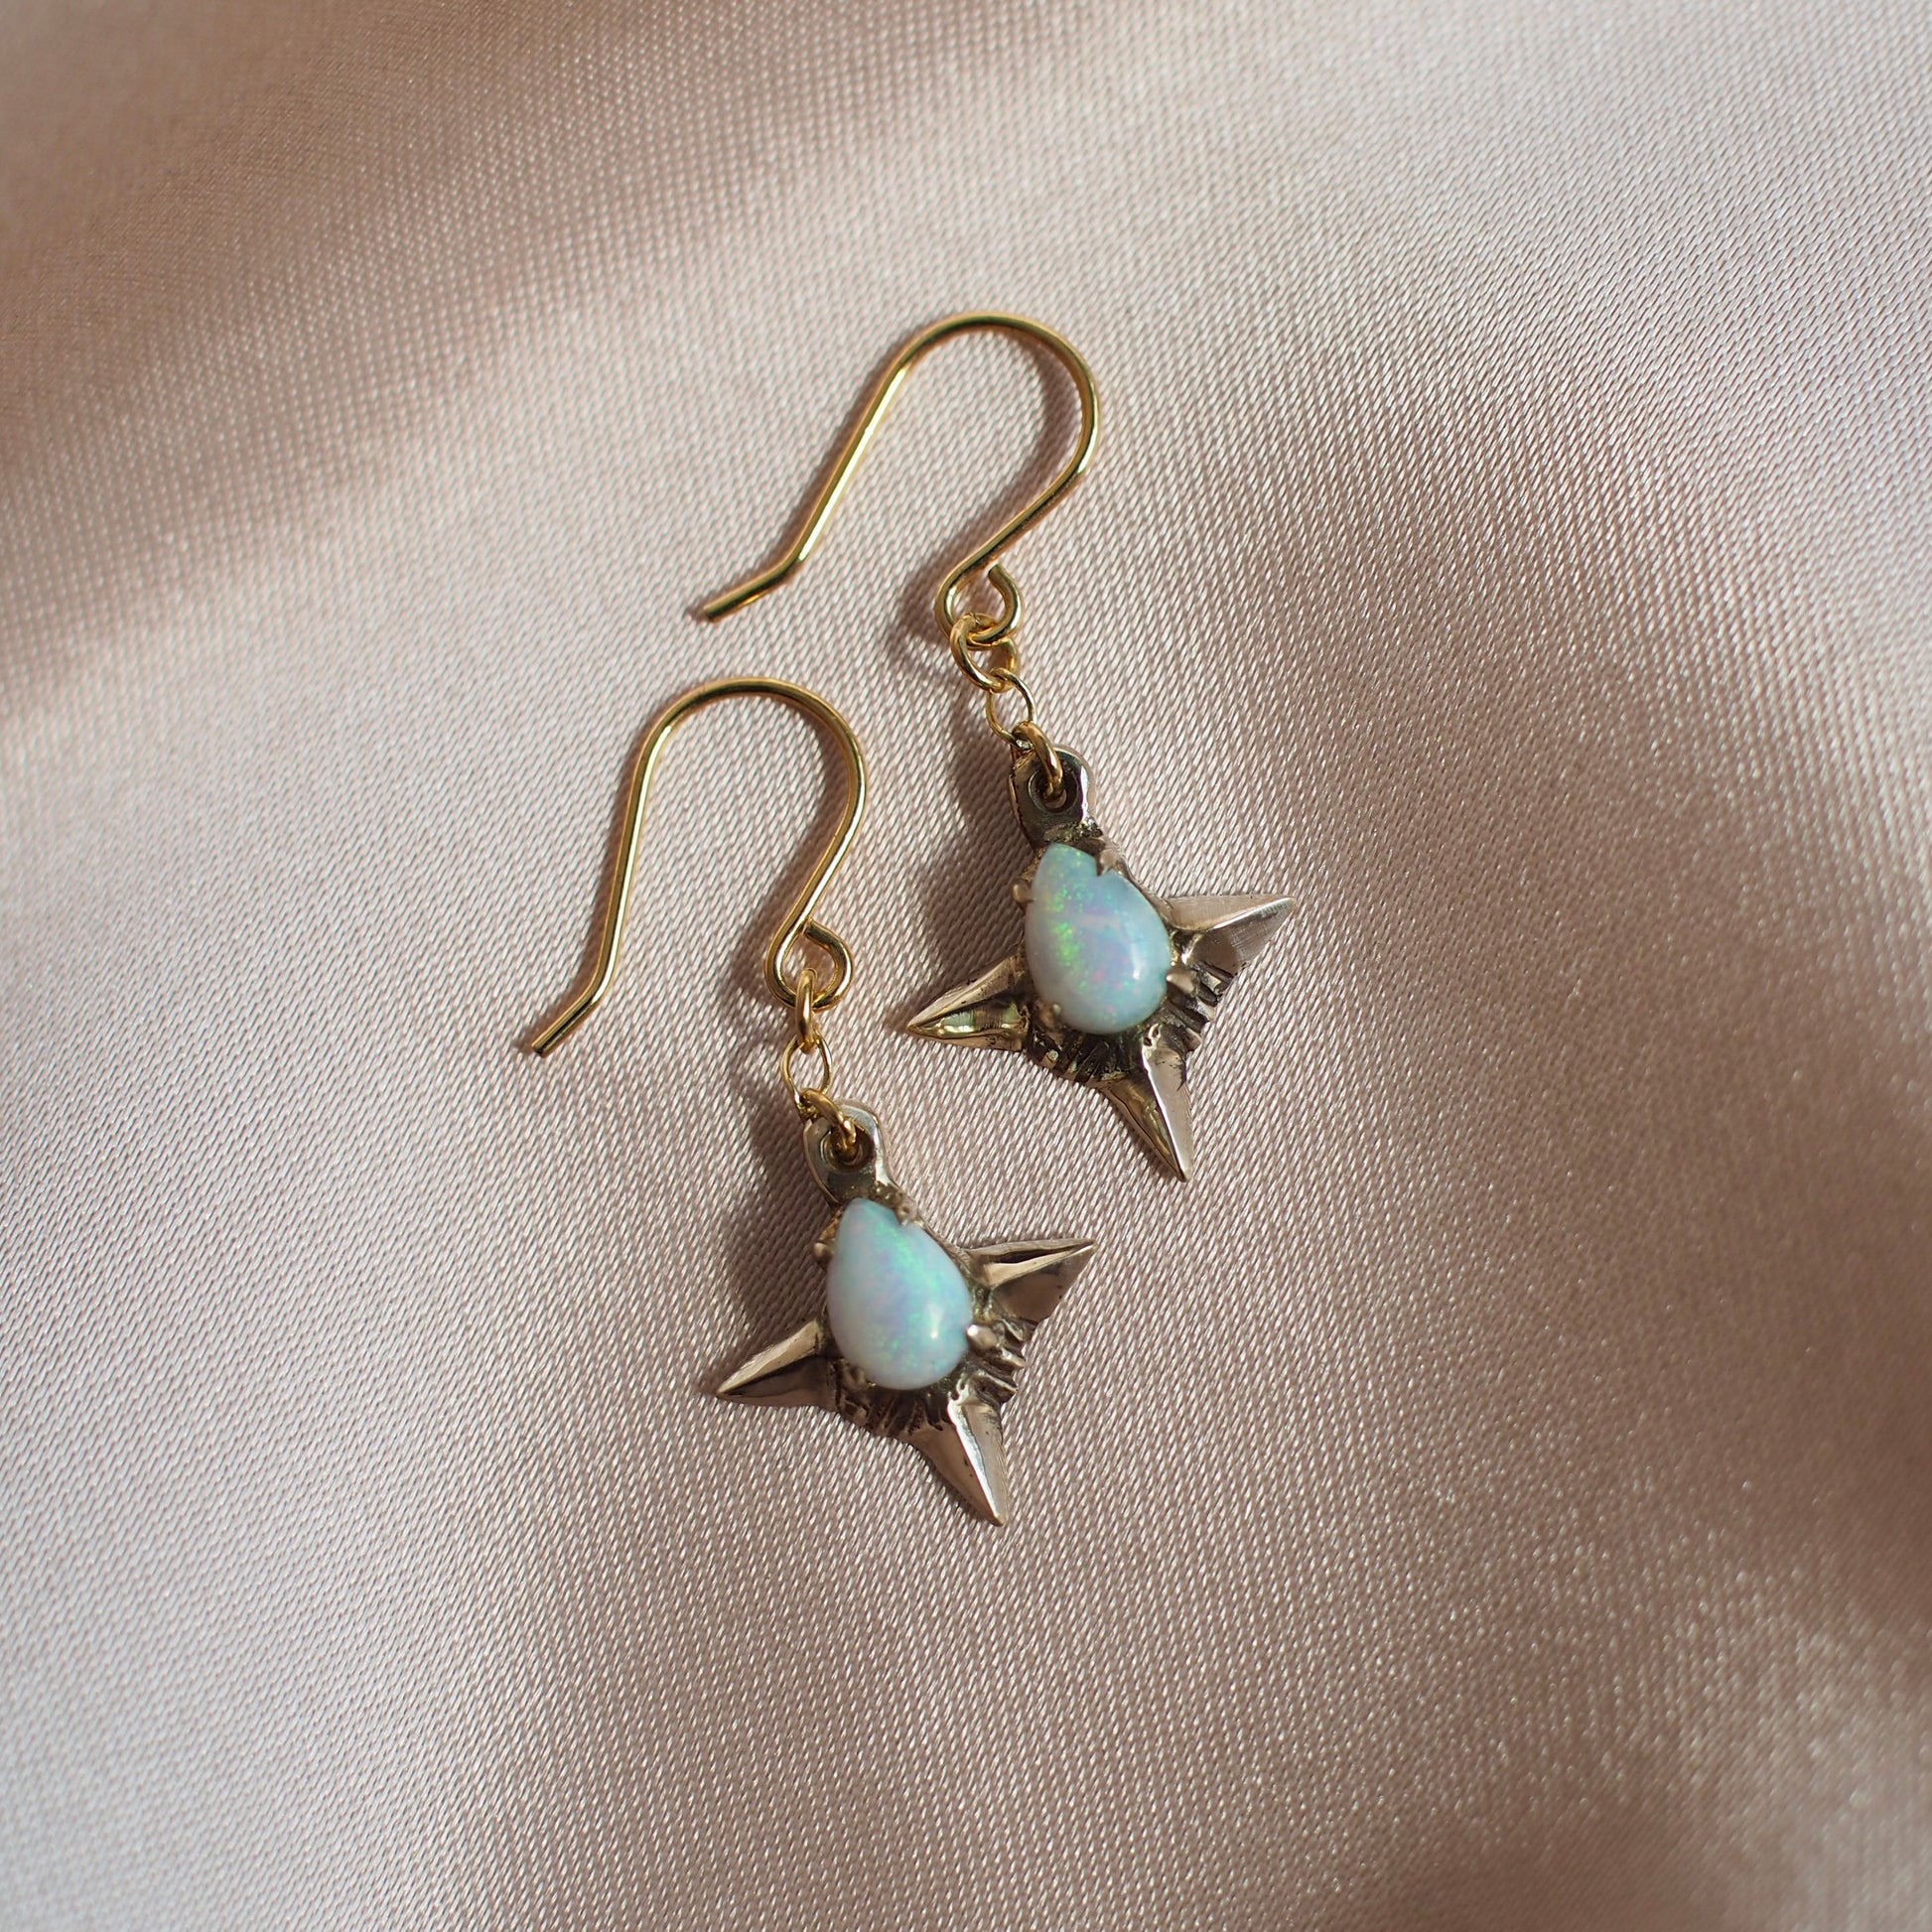 Teardrop shaped lab grown opal set in 4 point star setting in gold tone bronze handmade by Iron Oxide Designs